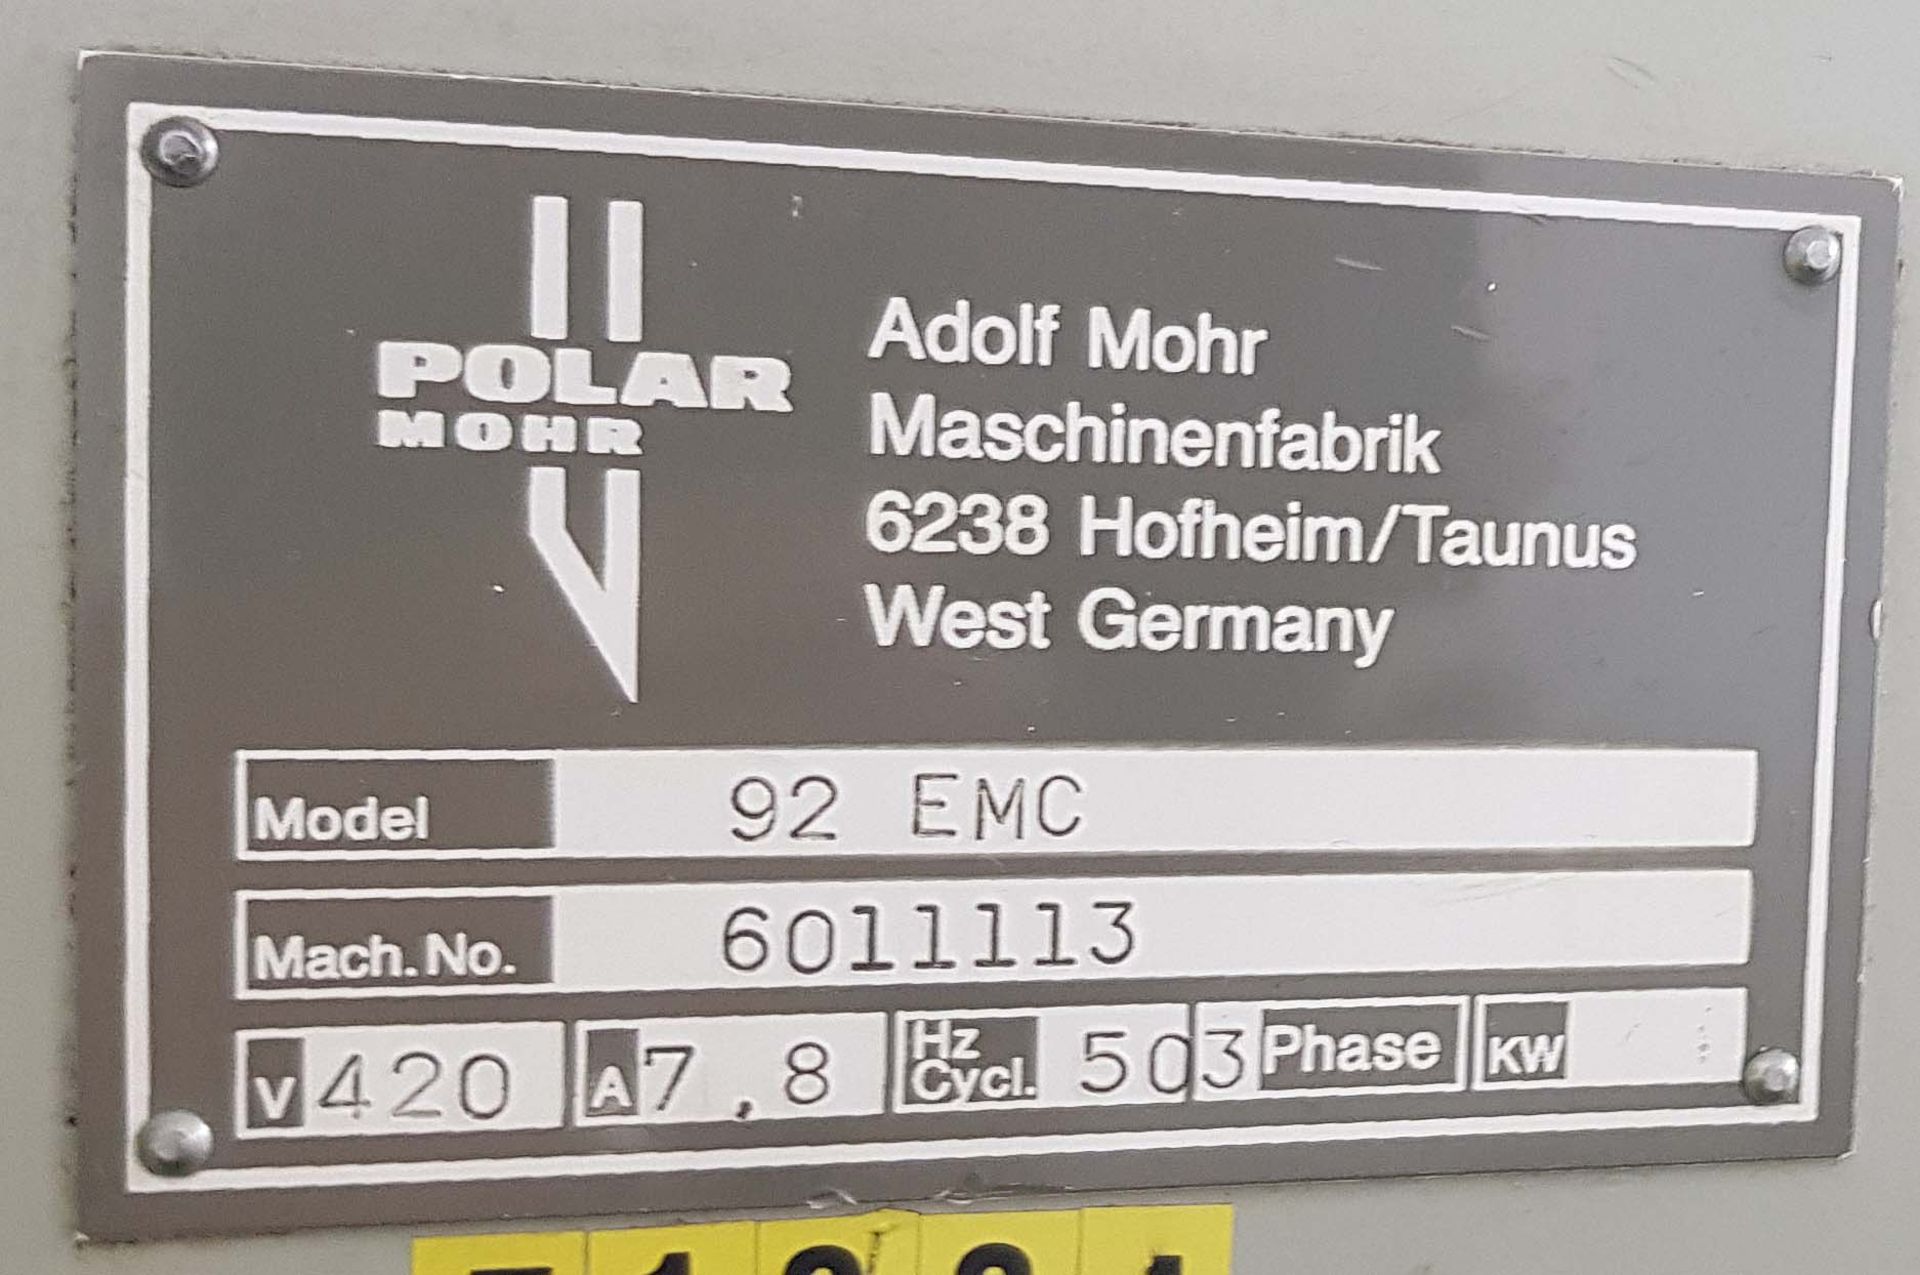 A POLAR MOHR Model 92 EMC 92cm Mechanical Paper Guillotine, Serial No. 6011113 with fitted Auto Back - Image 2 of 3